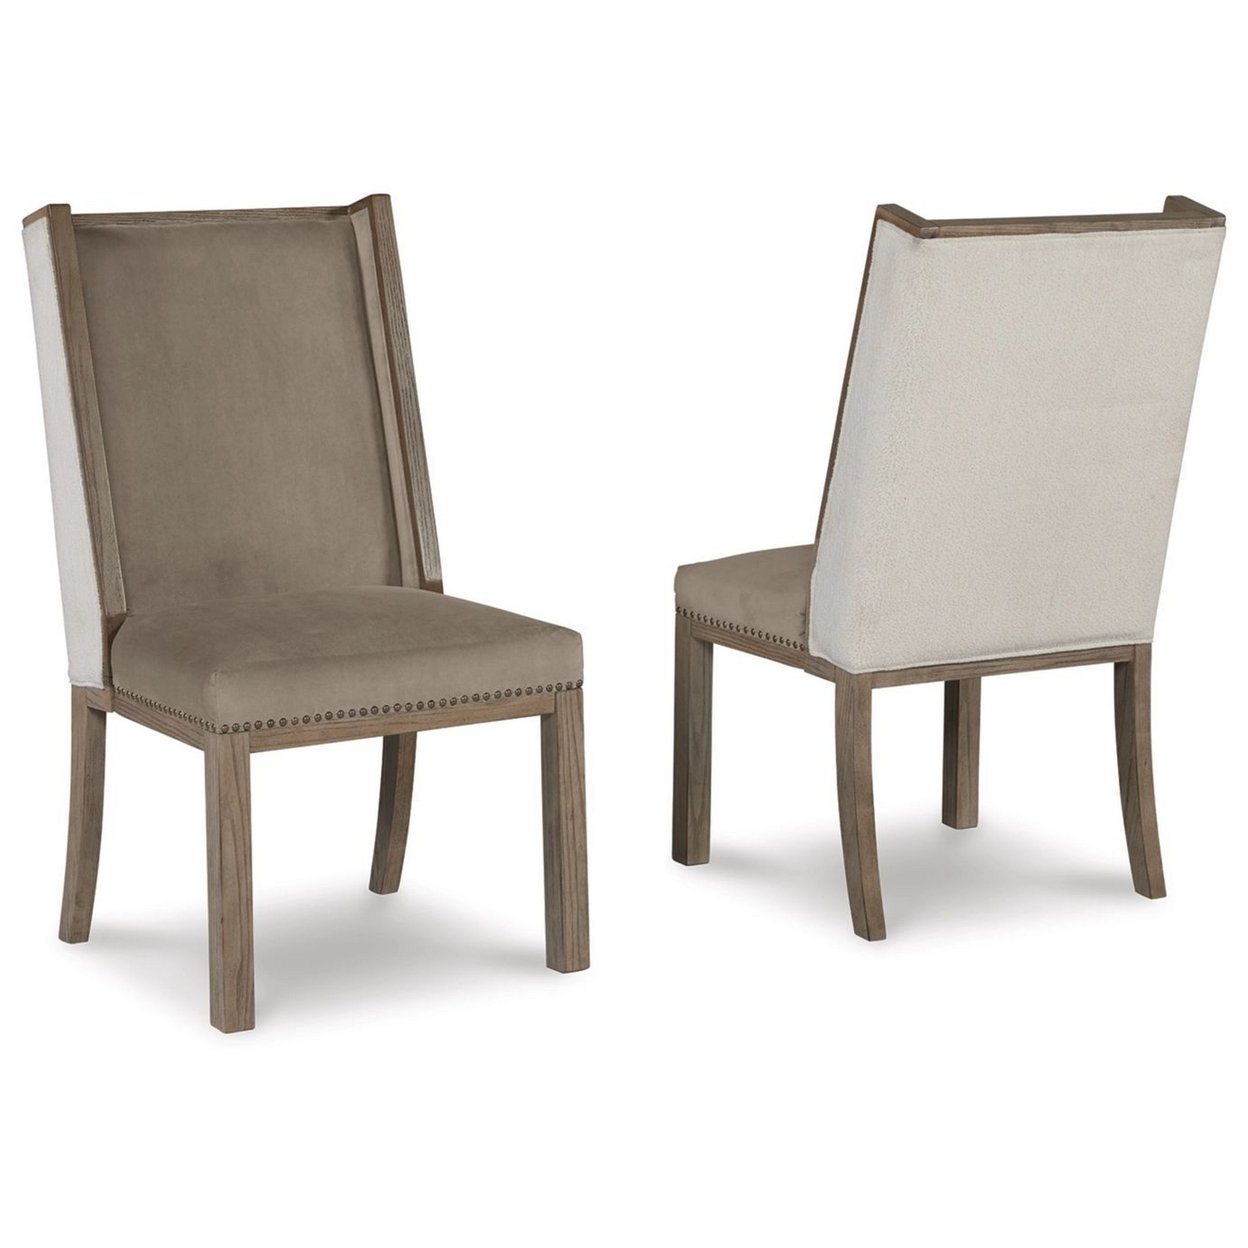 Afu 25 Inch Dining Chairs, Set Of 2, Shelter Style, Light Brown Upholstery- Saltoro Sherpi